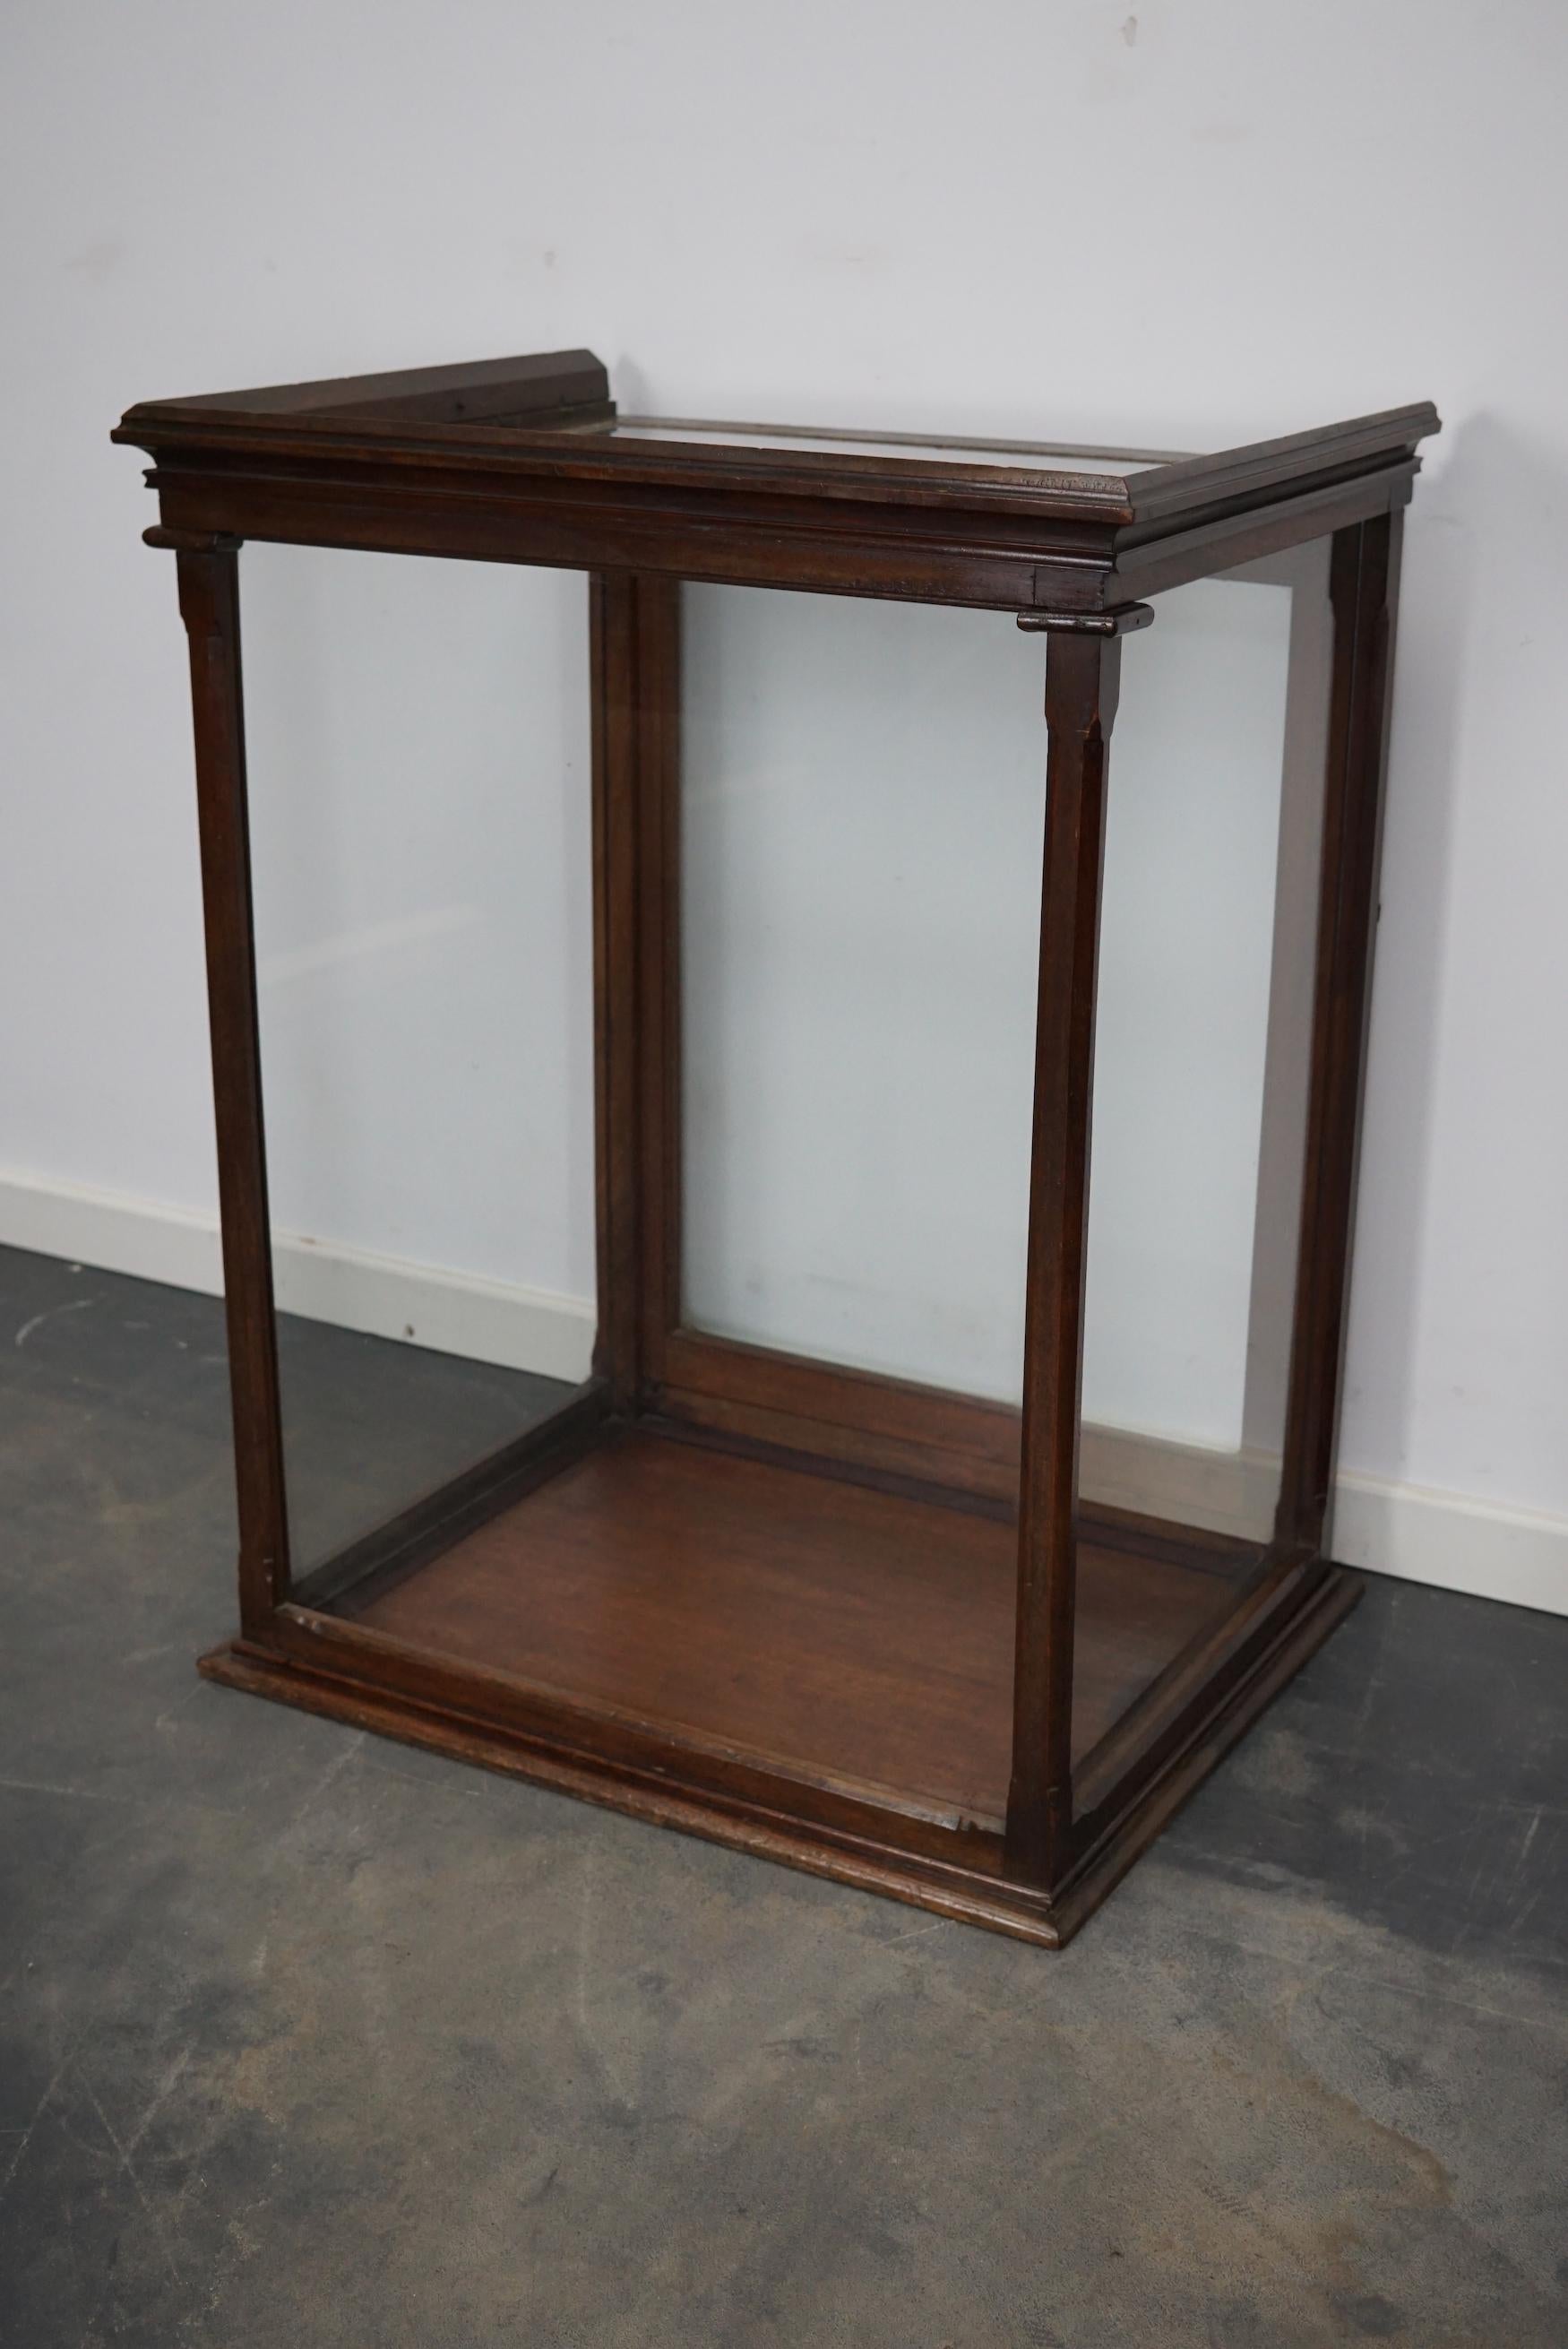 A museum quality Victorian mahogany display cabinet. This outstanding cabinet has a glass door fitted with the original handle and lock.